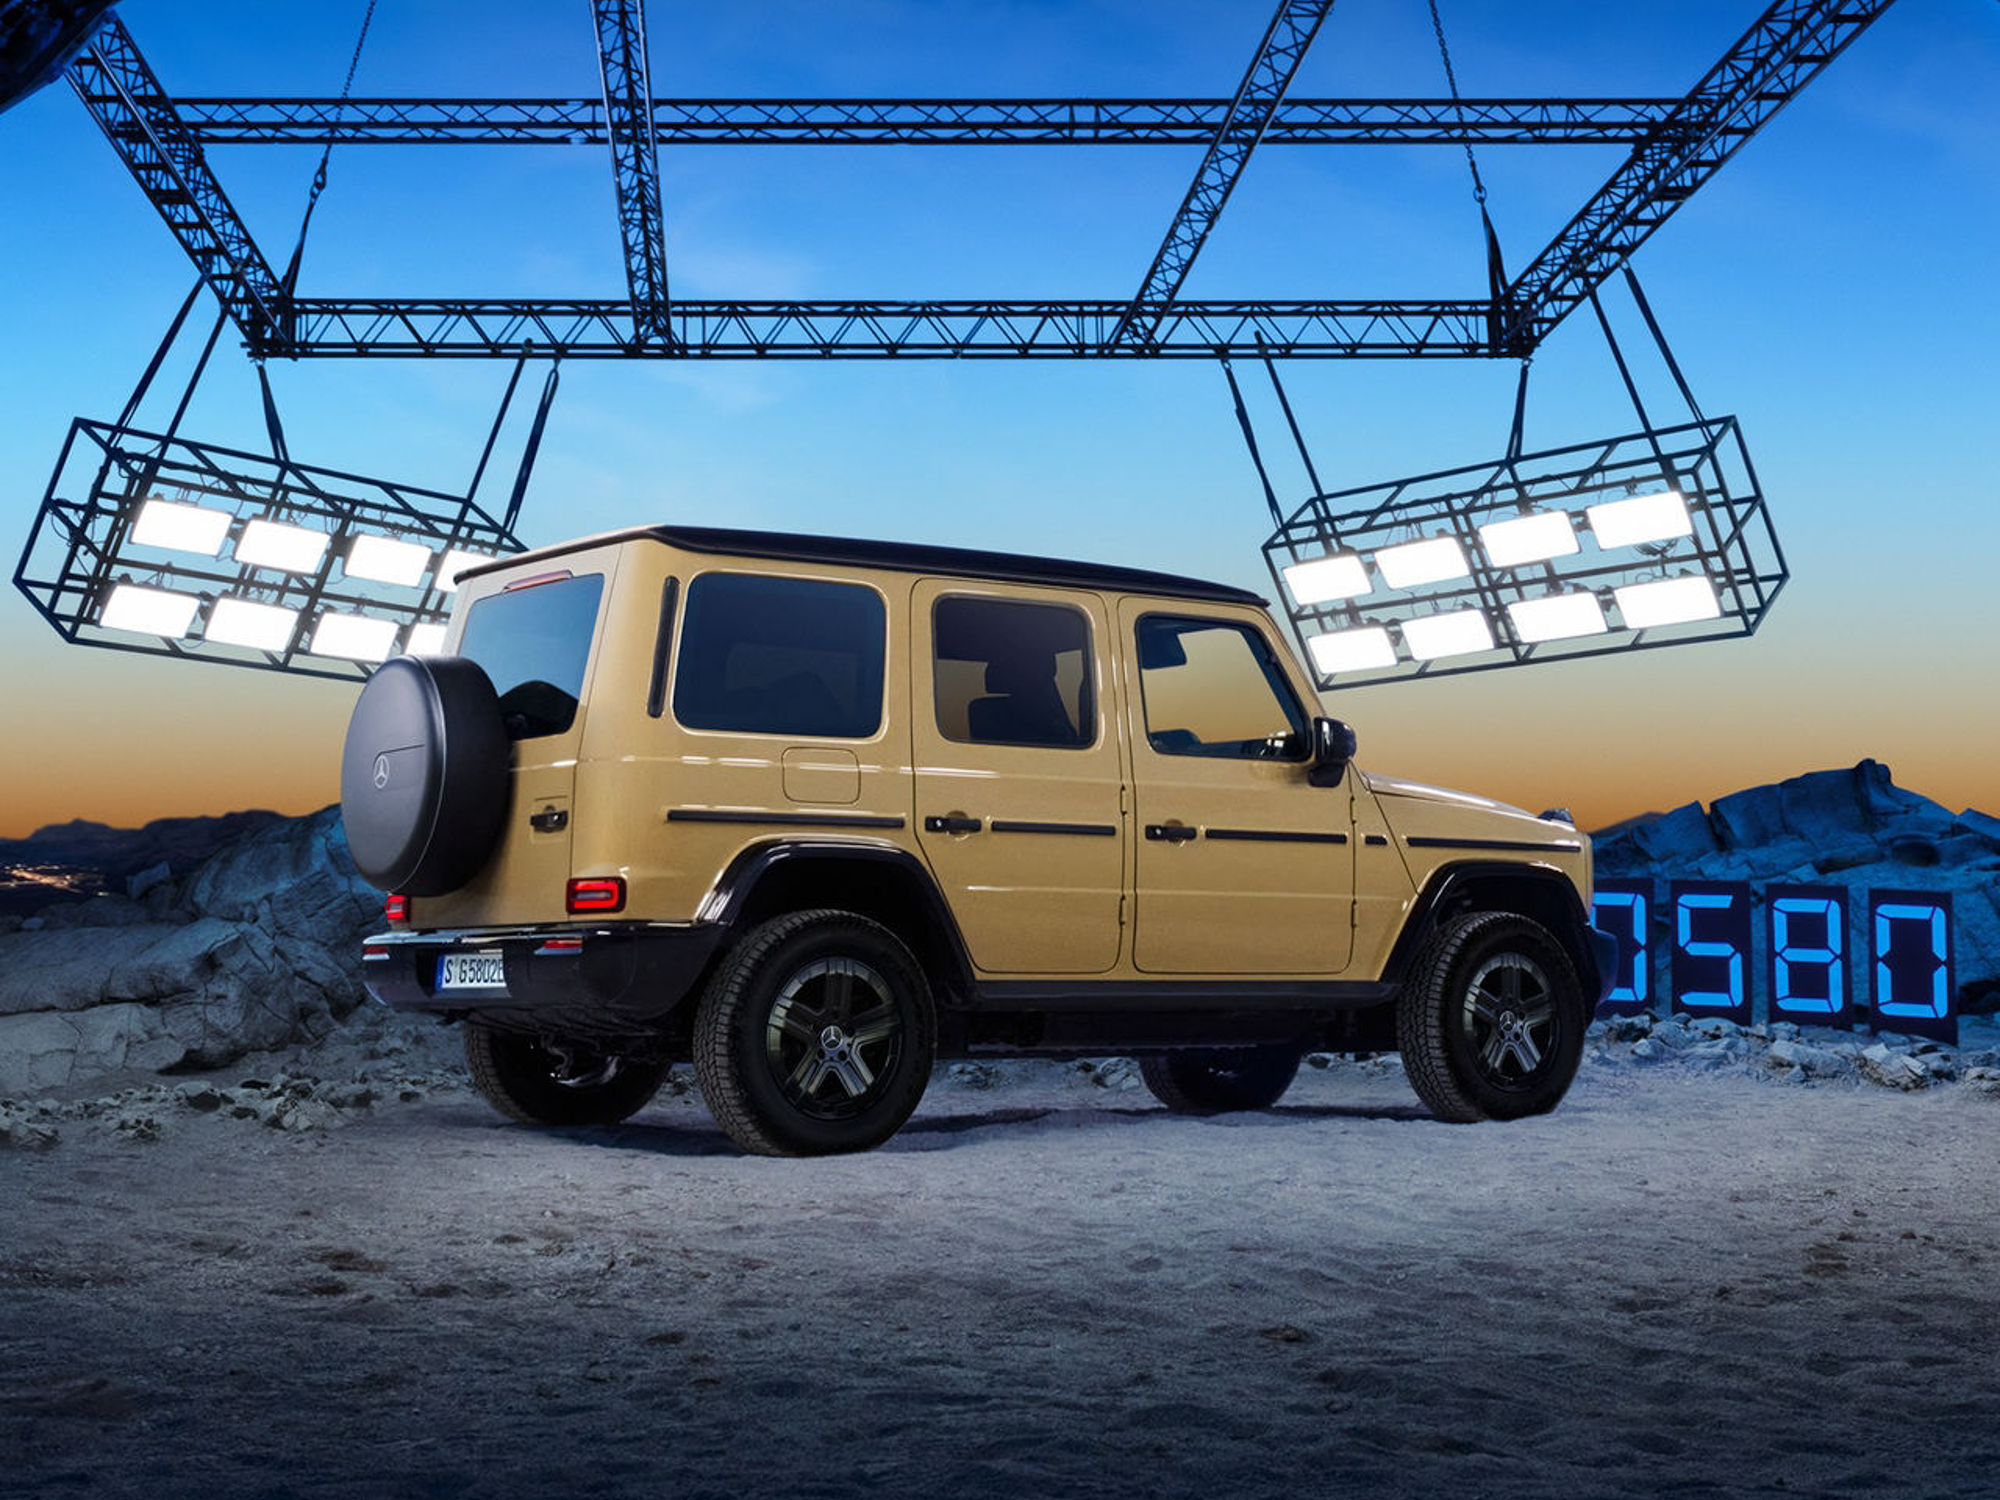 2025 Mercedes-Benz G580: range, price, release date, and more